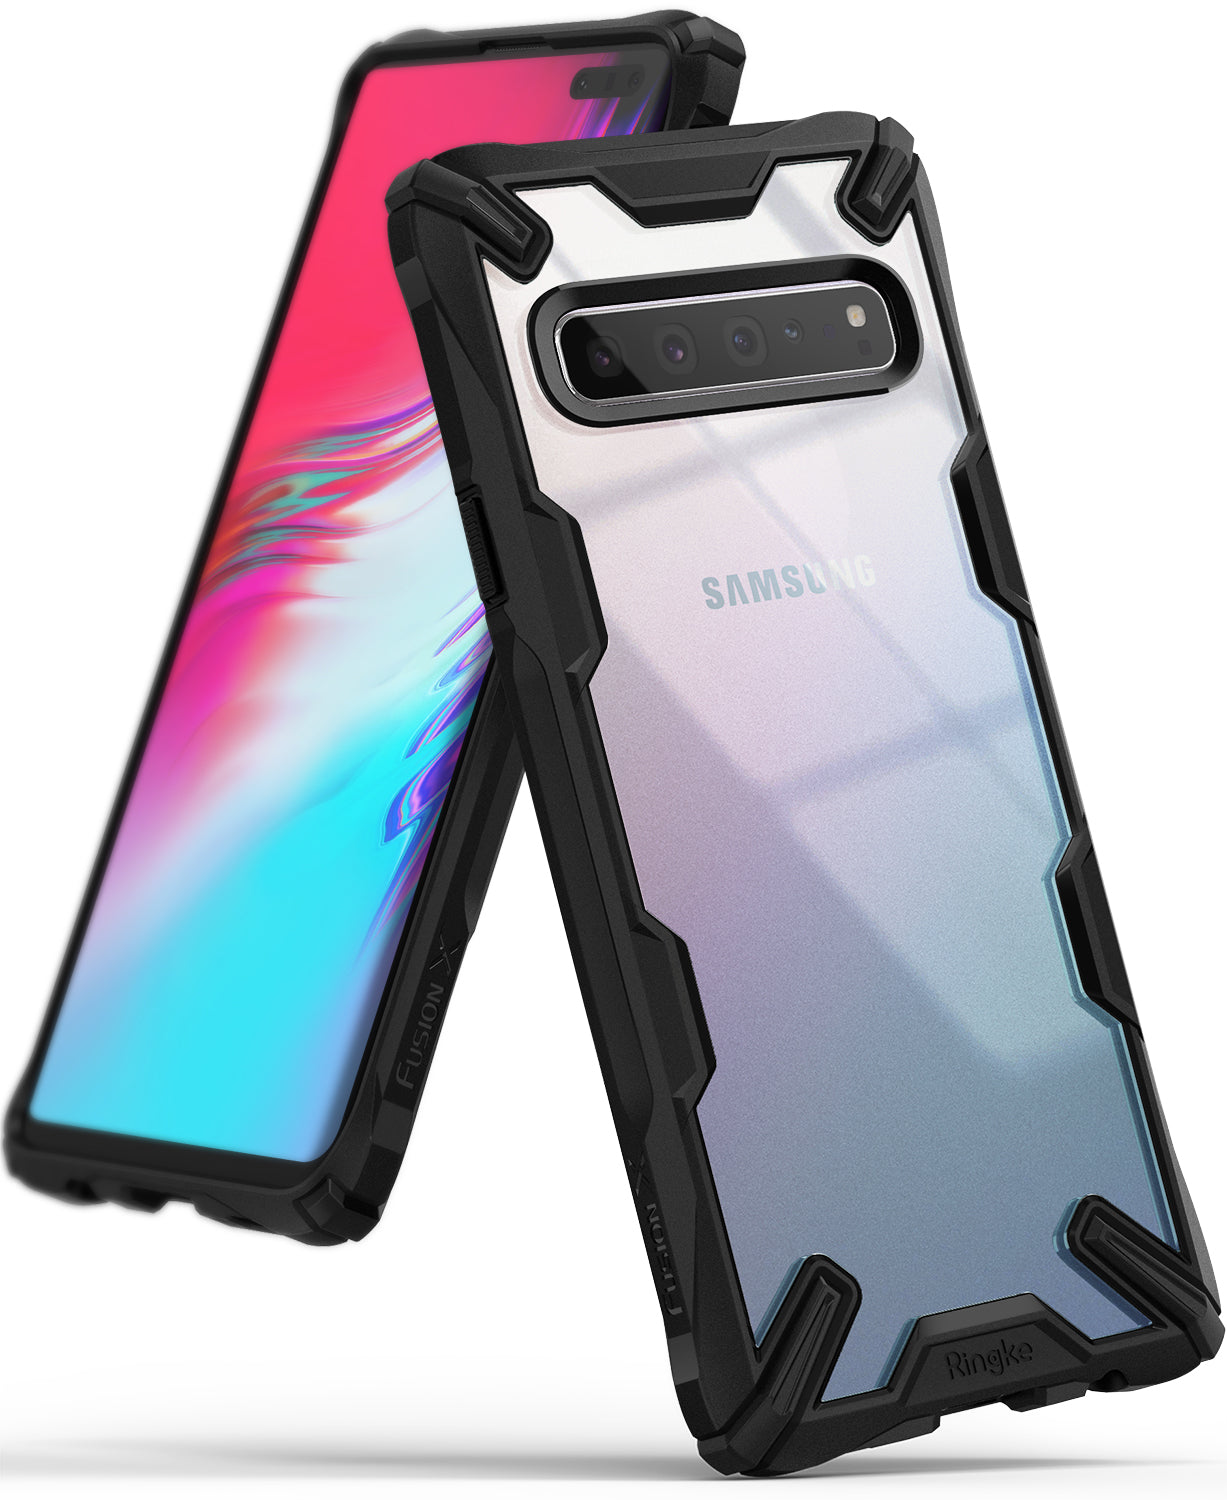 Galaxy S10 5G Case | Ringke Fusion-X – Ringke Official Store